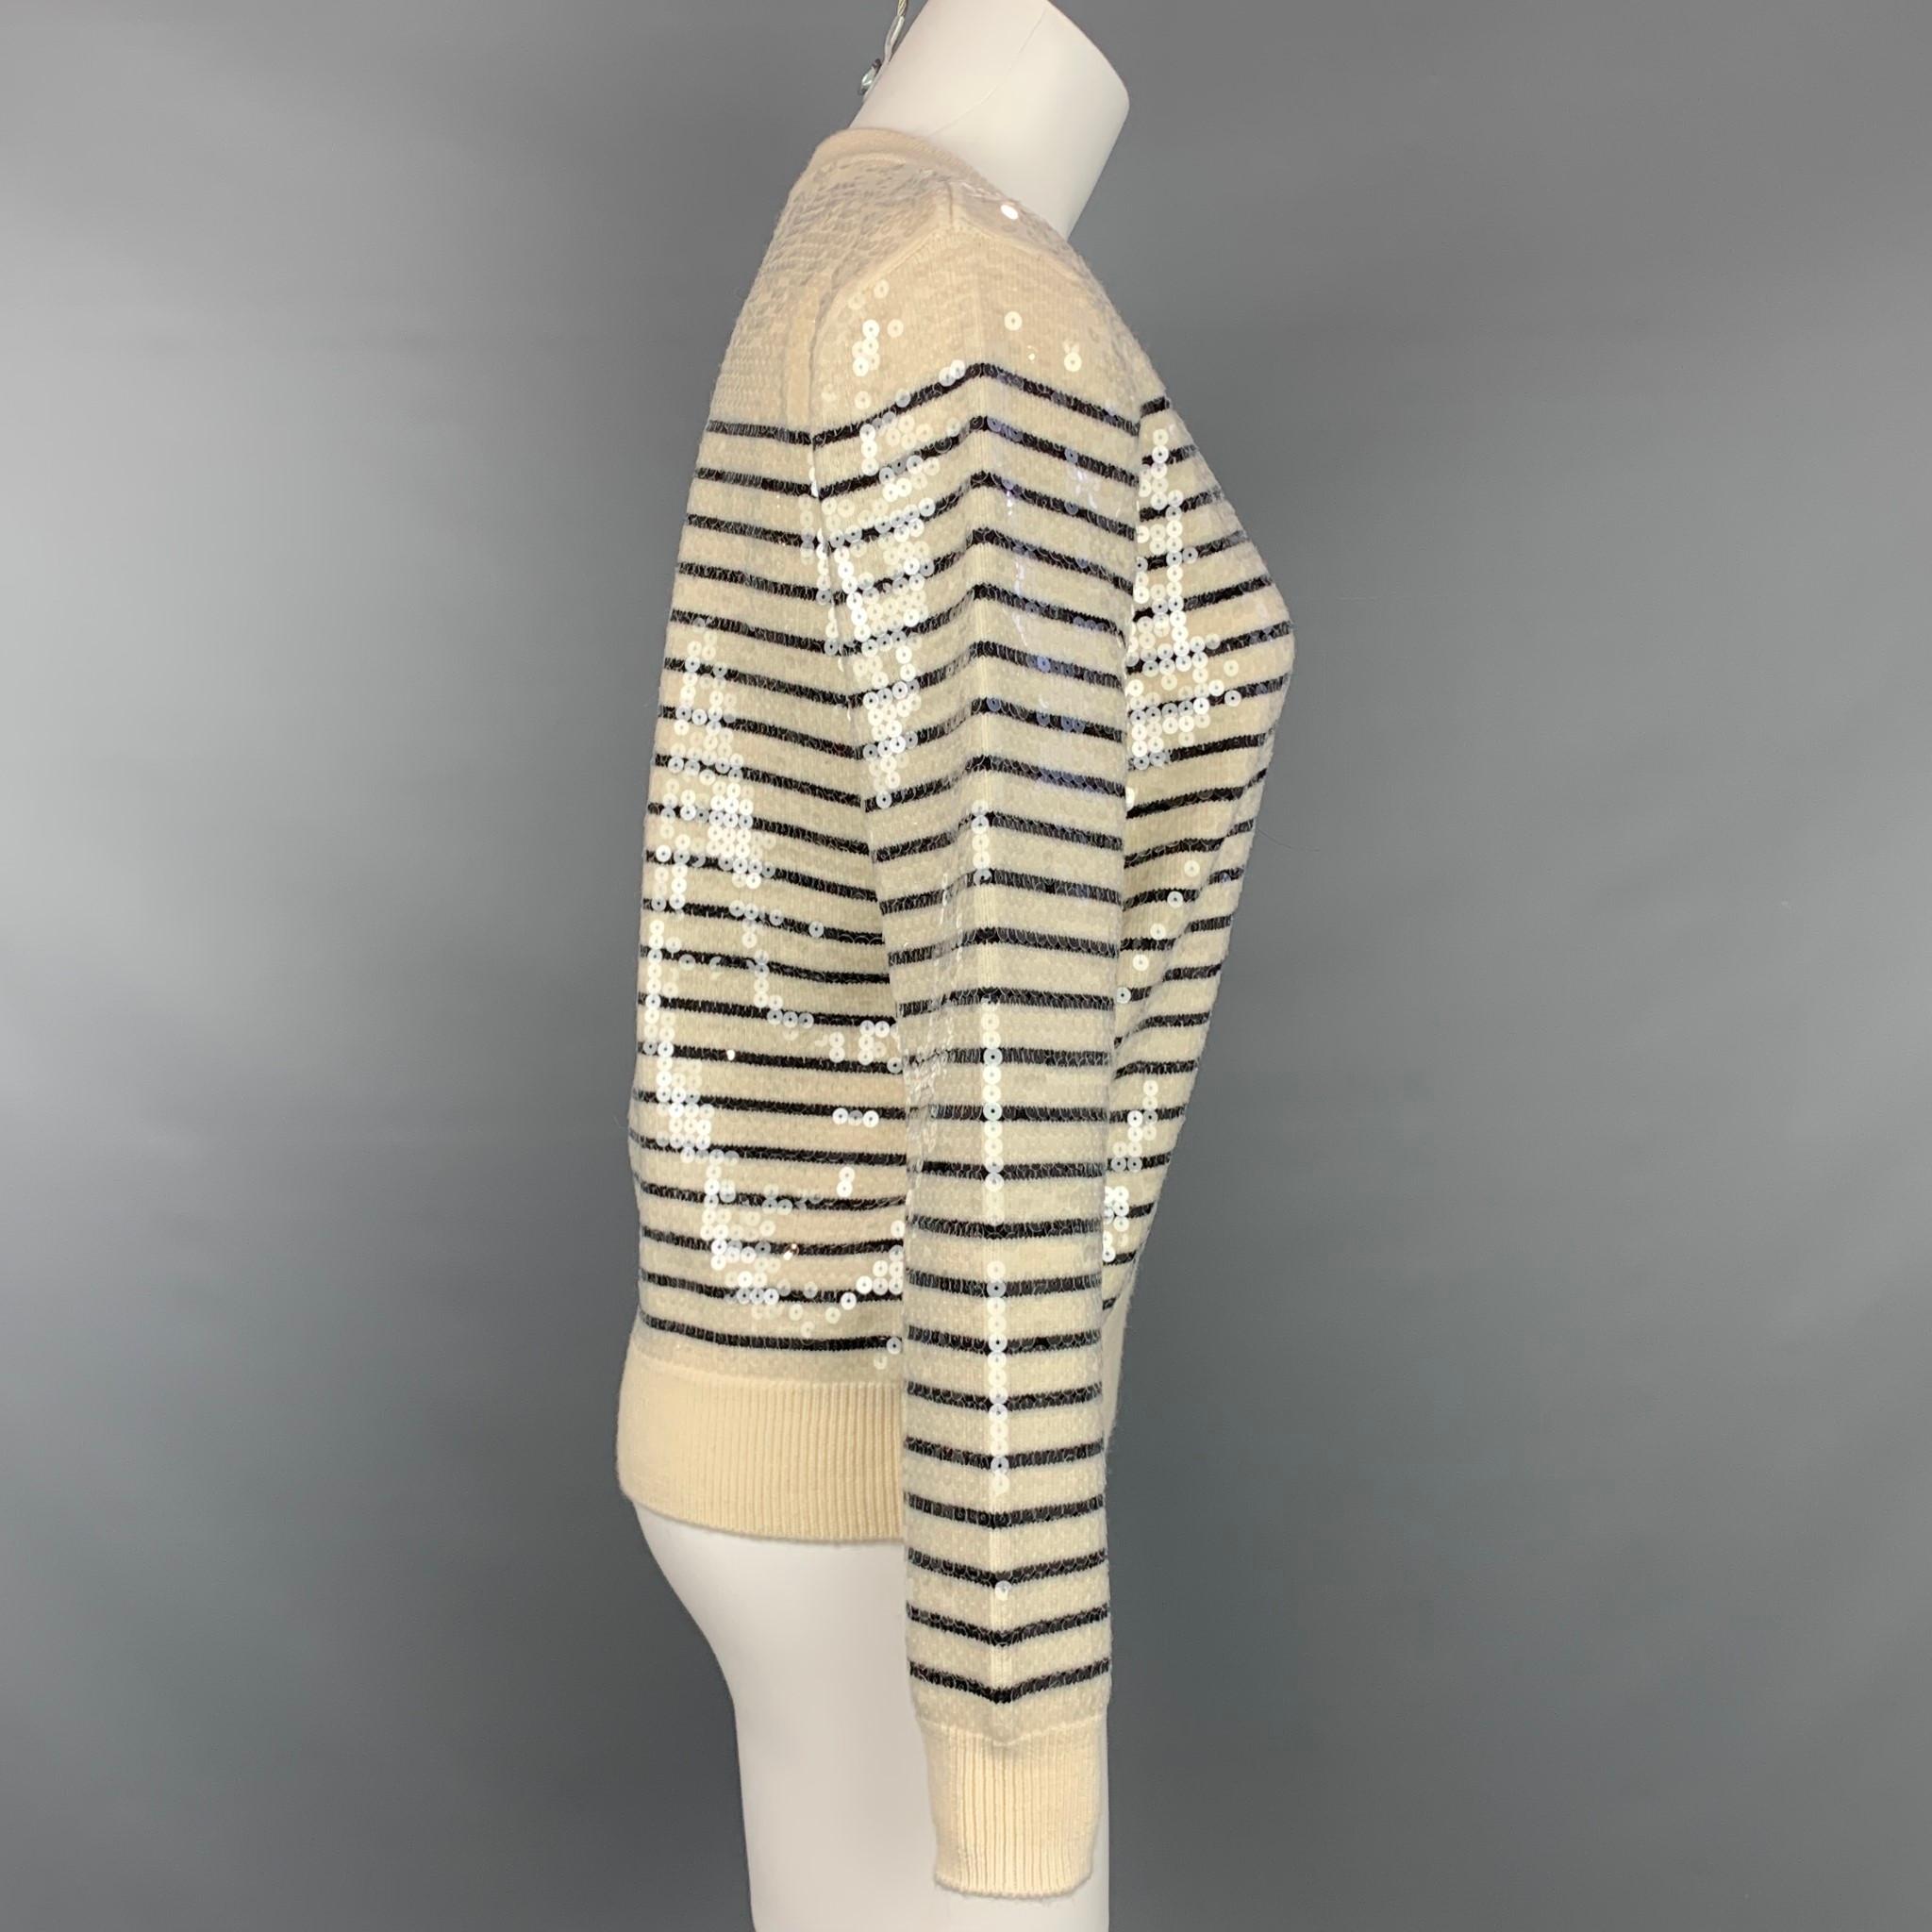 CELINE sweater comes in a cream sequined stripe wool featuring a ribbed hem, side buttons, and a crew-neck. Made in Italy.

Very Good Pre-Owned Condition.
Marked: S
Original  Retail Price: $2,200.00

Measurements:

Shoulder: 16.5 in.
Bust: 35